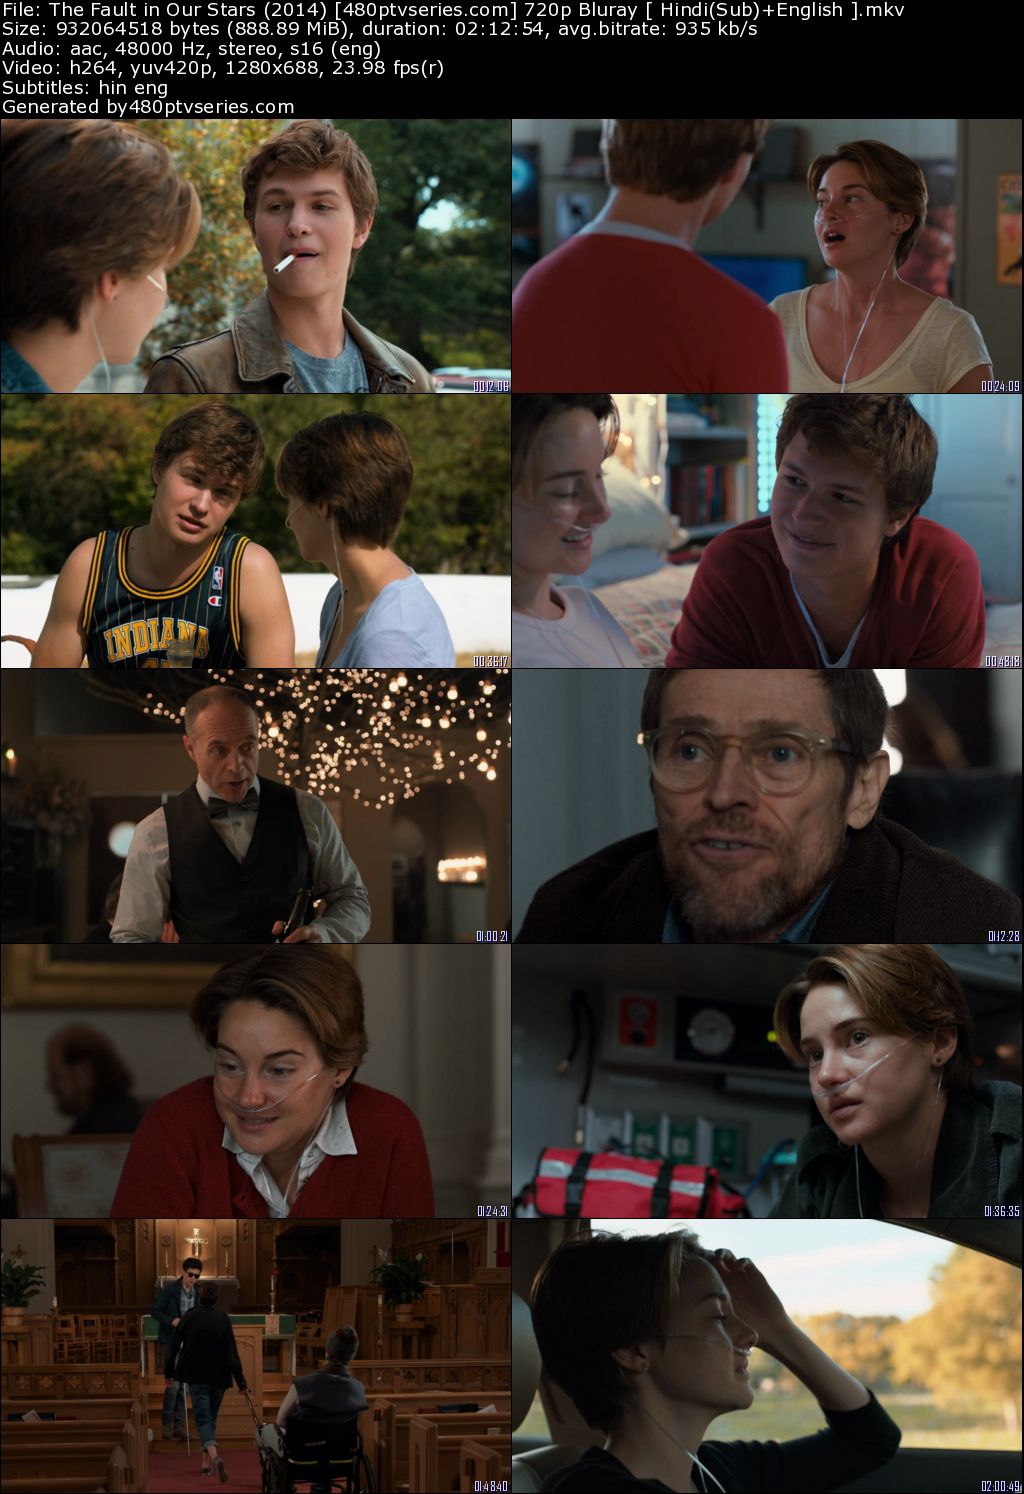 The Fault in Our Stars (2014) 720p Bluray x264 [ Hindi+English ] Direct Links Free Watch Online Full Movie Download Worldfree4u 9xmovies